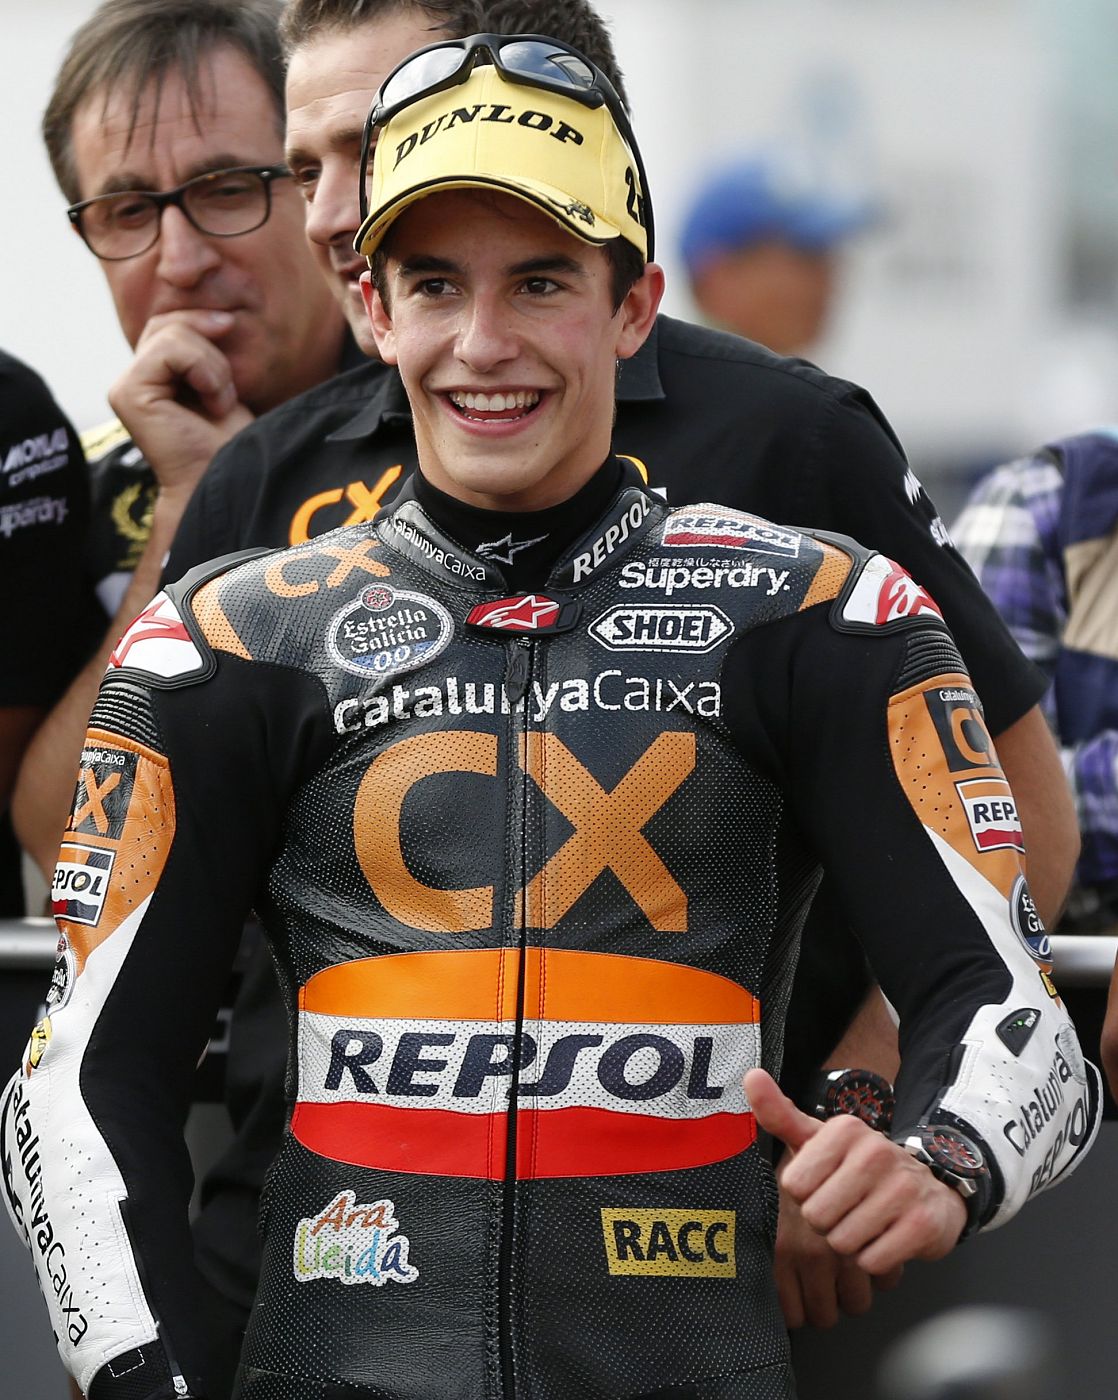 Suter Moto2 rider Marquez of Spain gives a thumbs-up after the qualifying session for Sunday's Japanese Grand Prix in Motegi